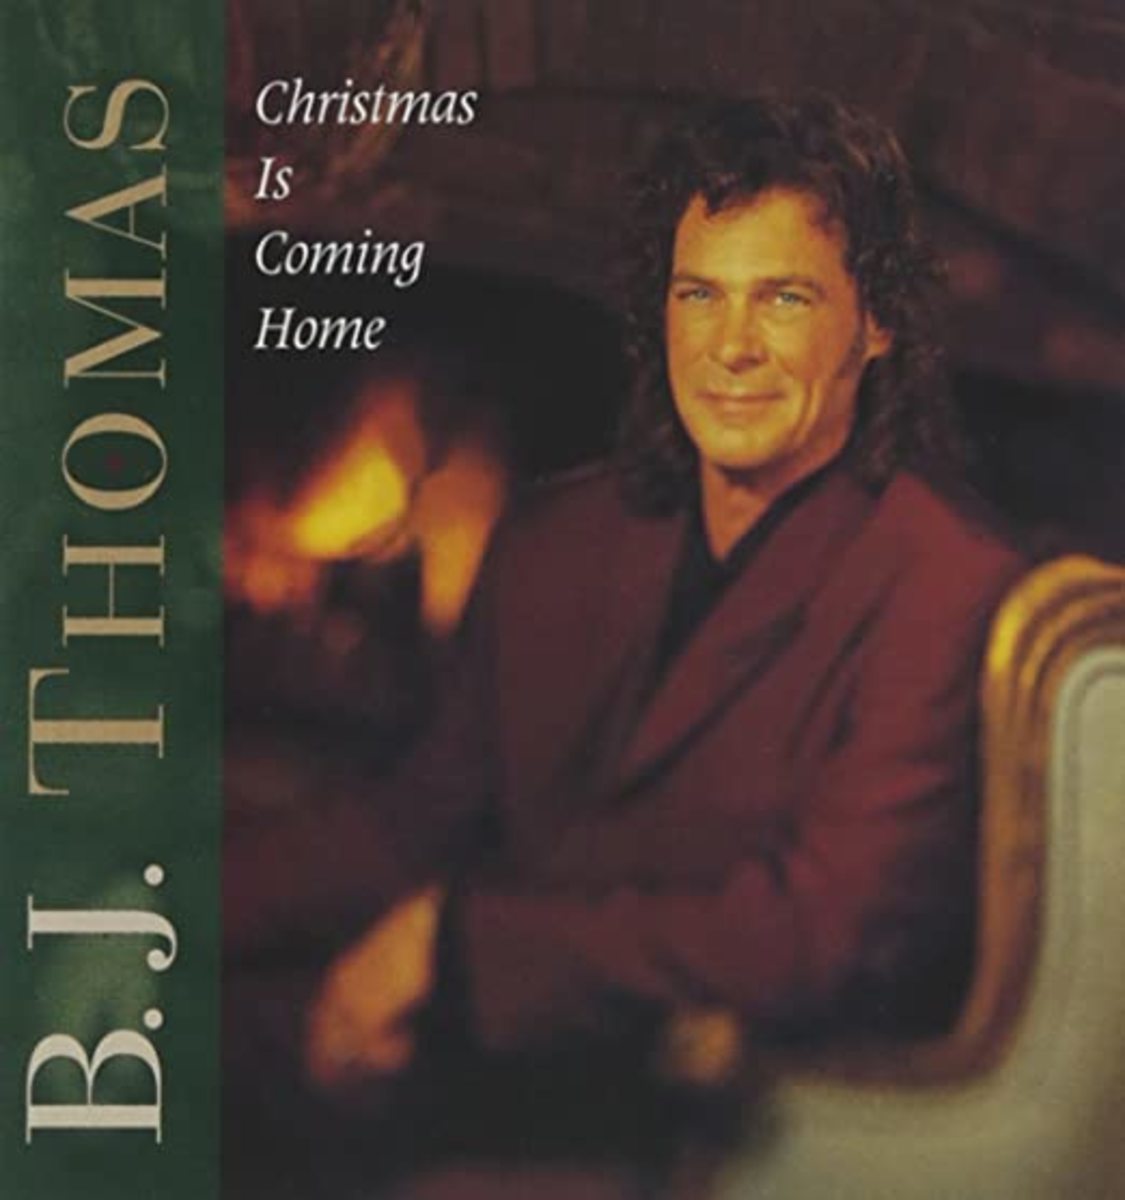 Christmas is Coming Home by BJ Thomas